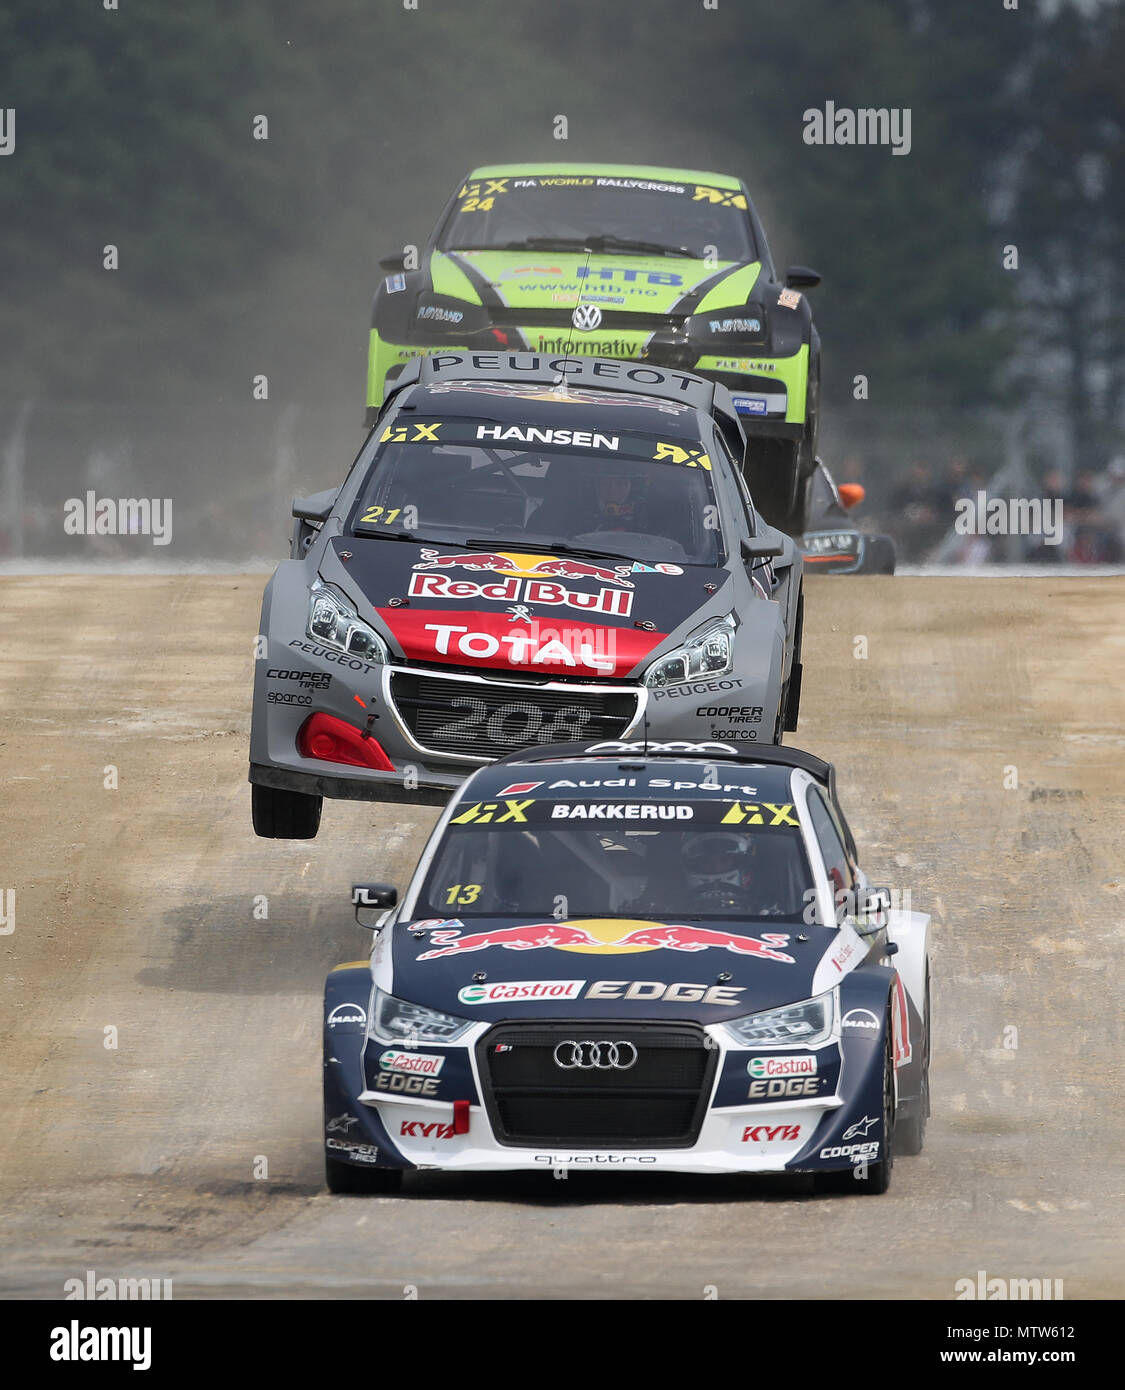 Timmy Hansen during day two of the 2018 FIA World Rallycross Championship at Silverstone, Towcester. PRESS ASSOCIATION Photo. Picture date: Saturday May 26, 2018. See PA story AUTO Rally. Photo credit should read: David Davies/PA Wire Stock Photo